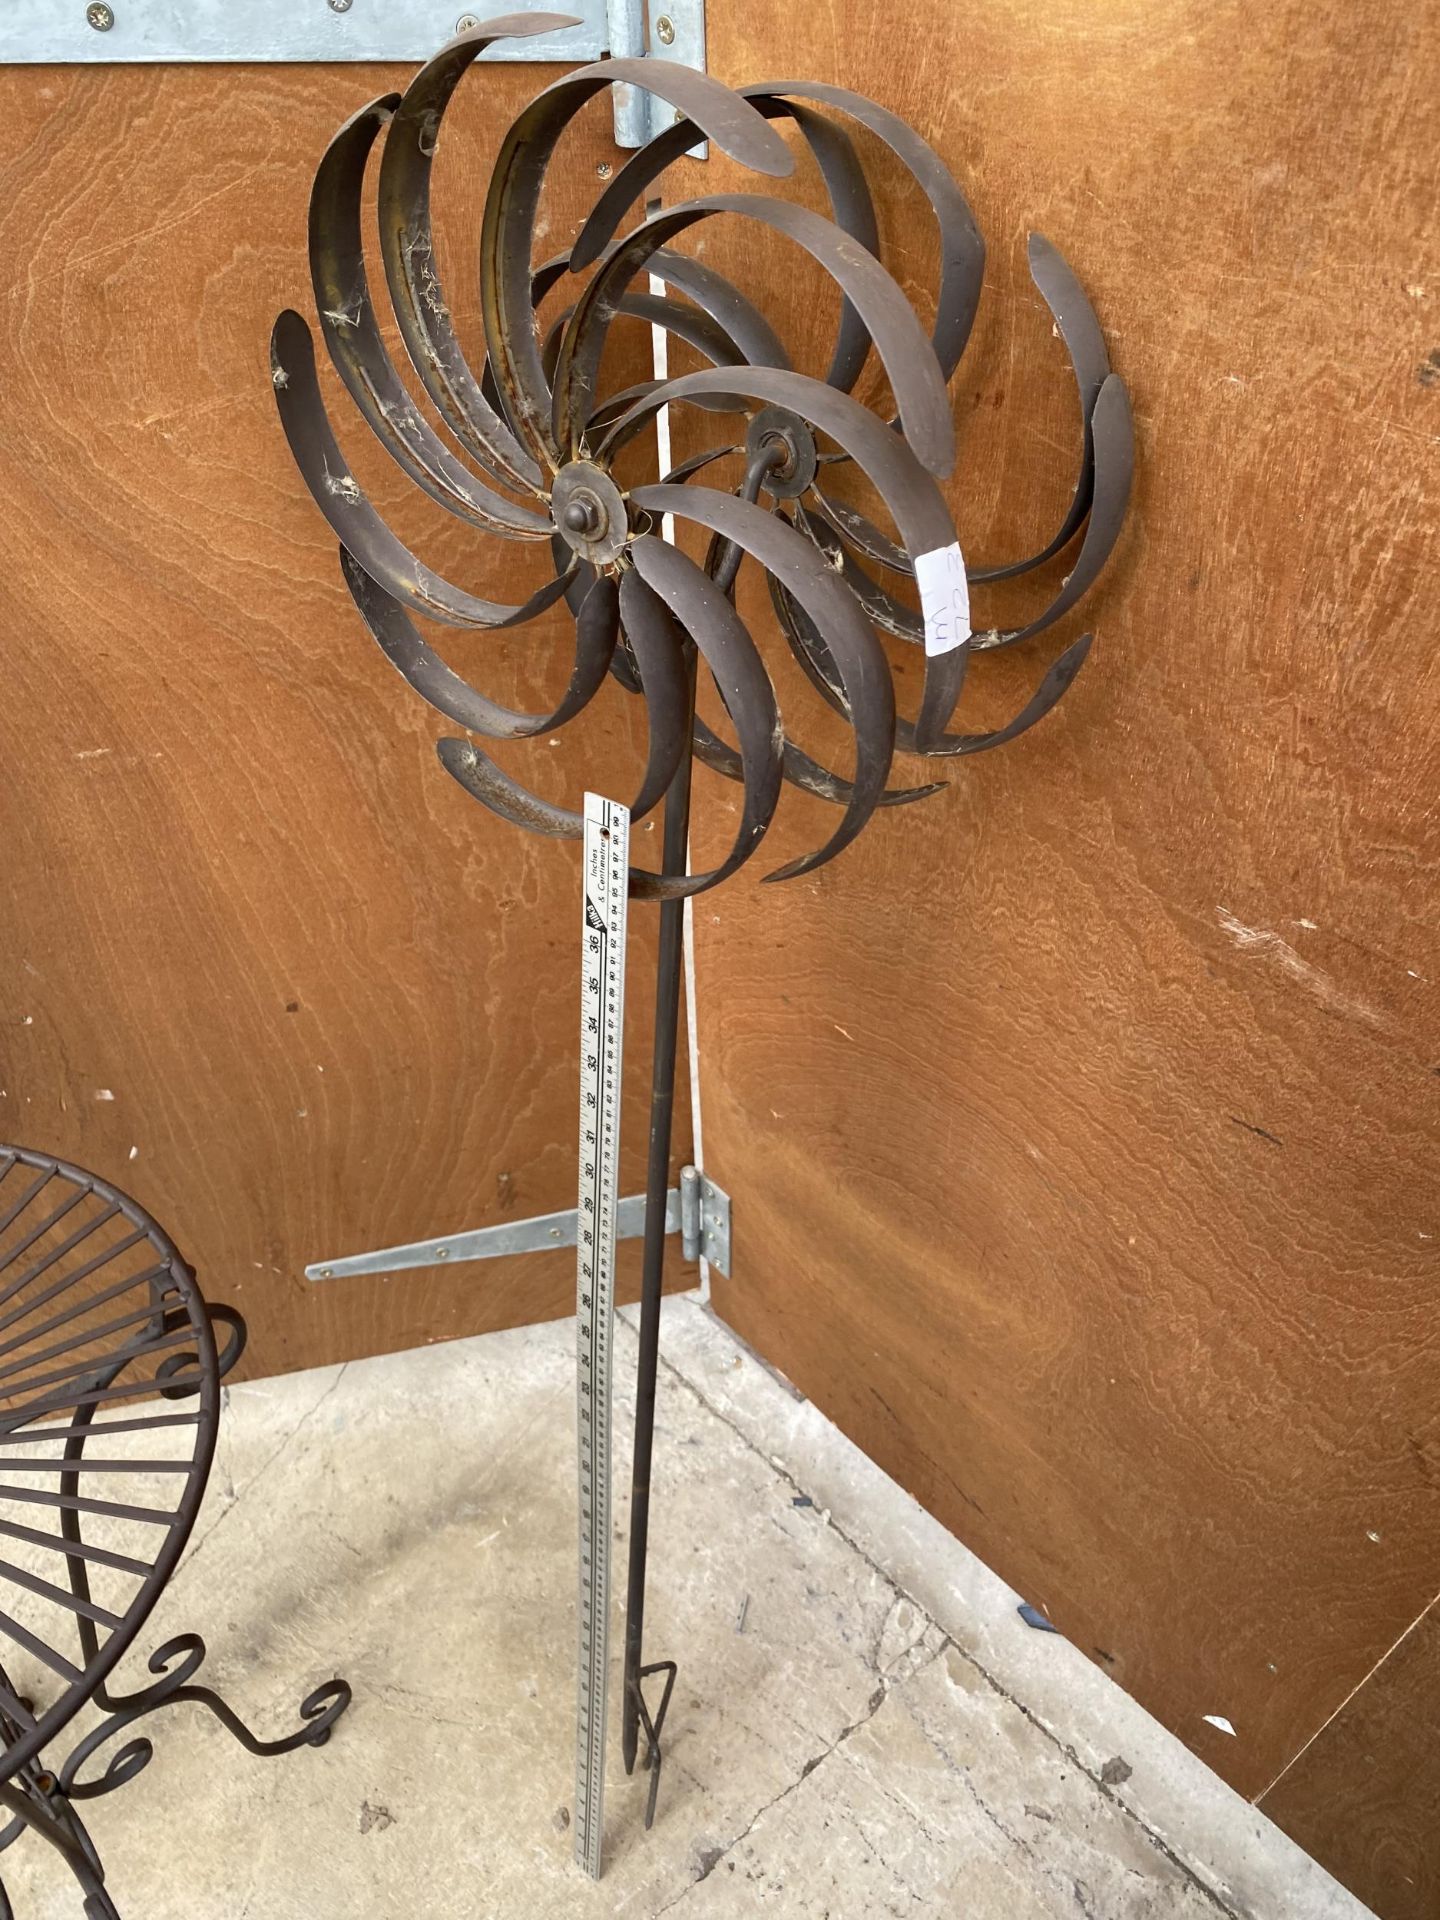 A SMALL DECORATIVE METAL SIDE TABLE AND A METAL WIND SPINNER - Image 5 of 5